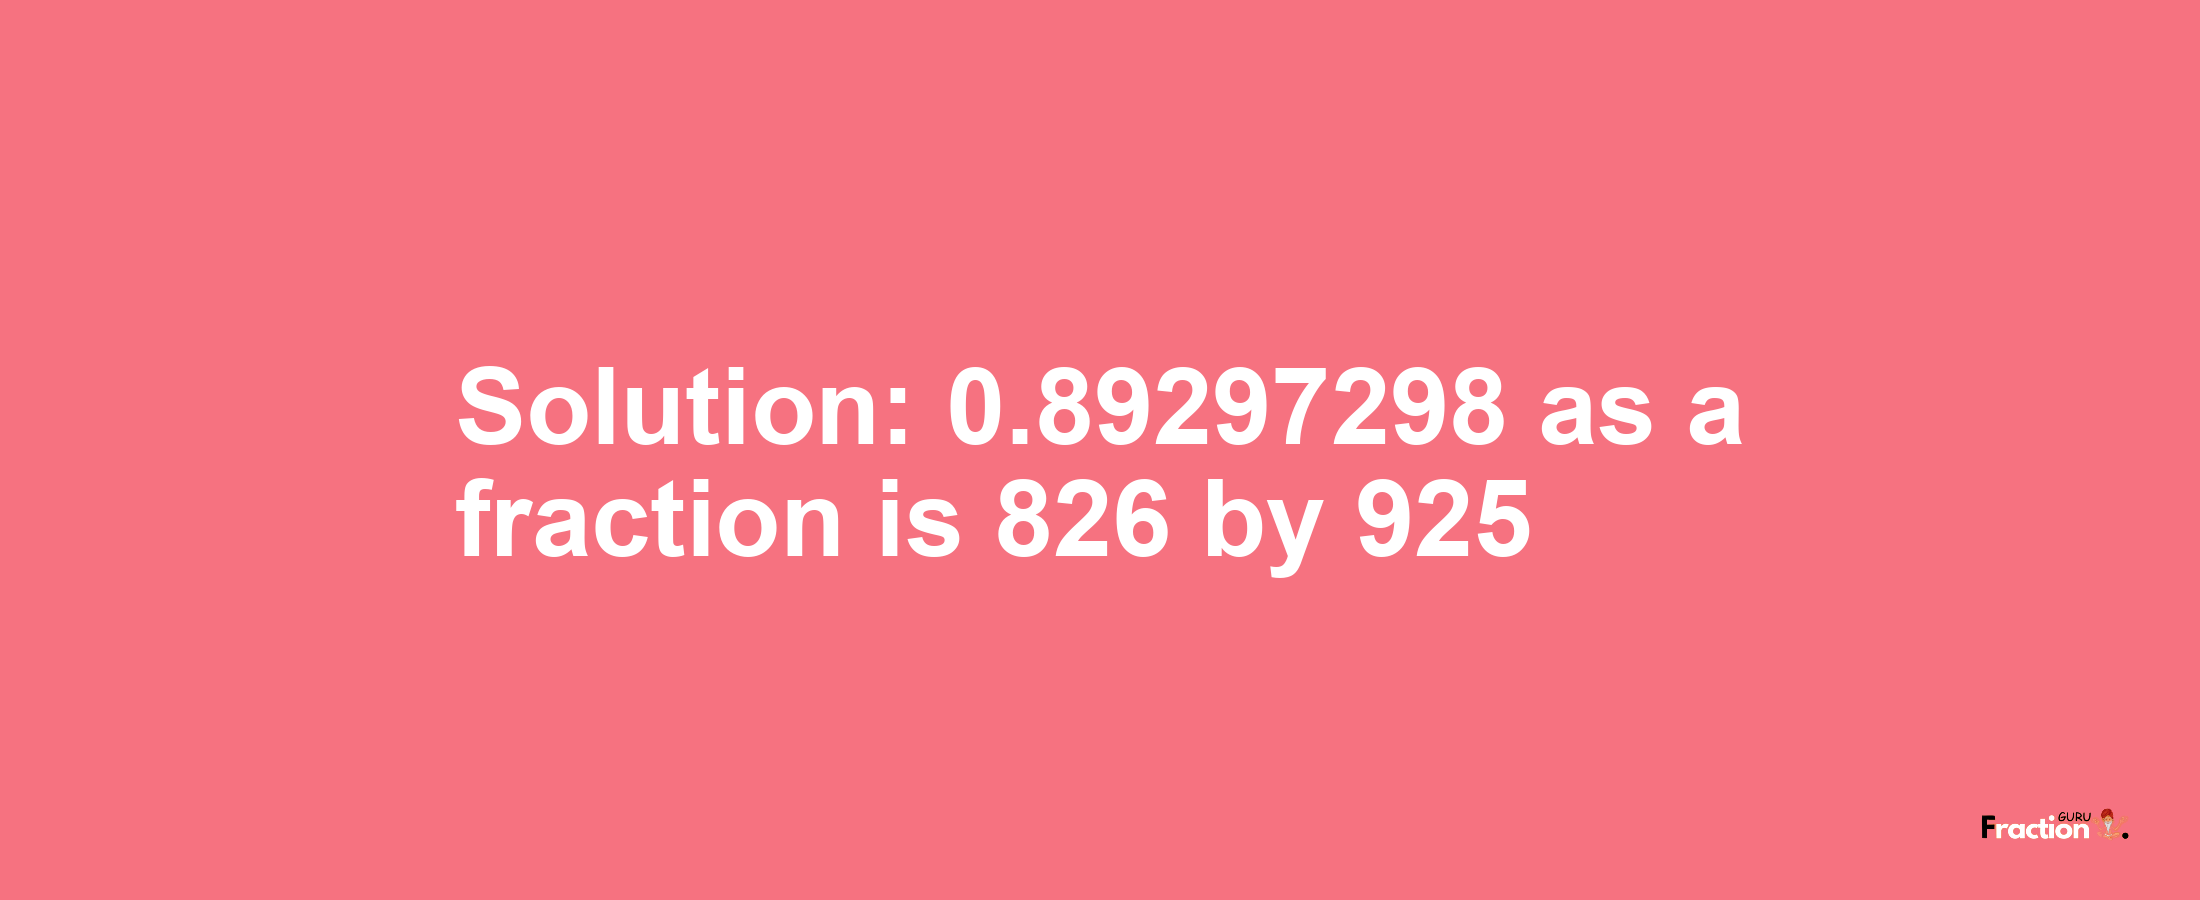 Solution:0.89297298 as a fraction is 826/925